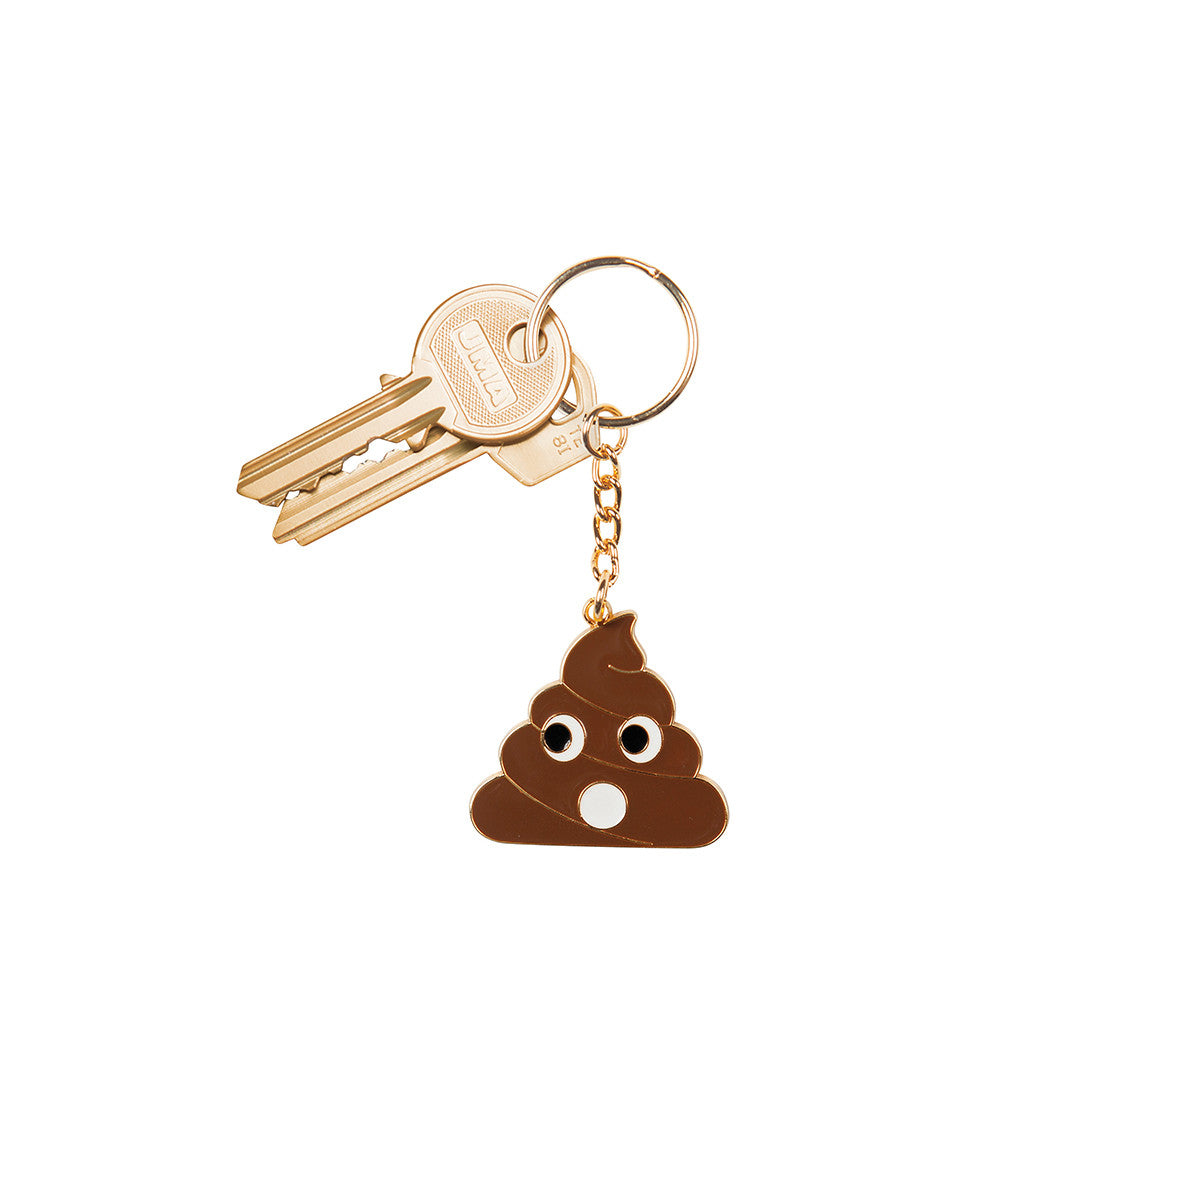 POO KEYRING (Available)